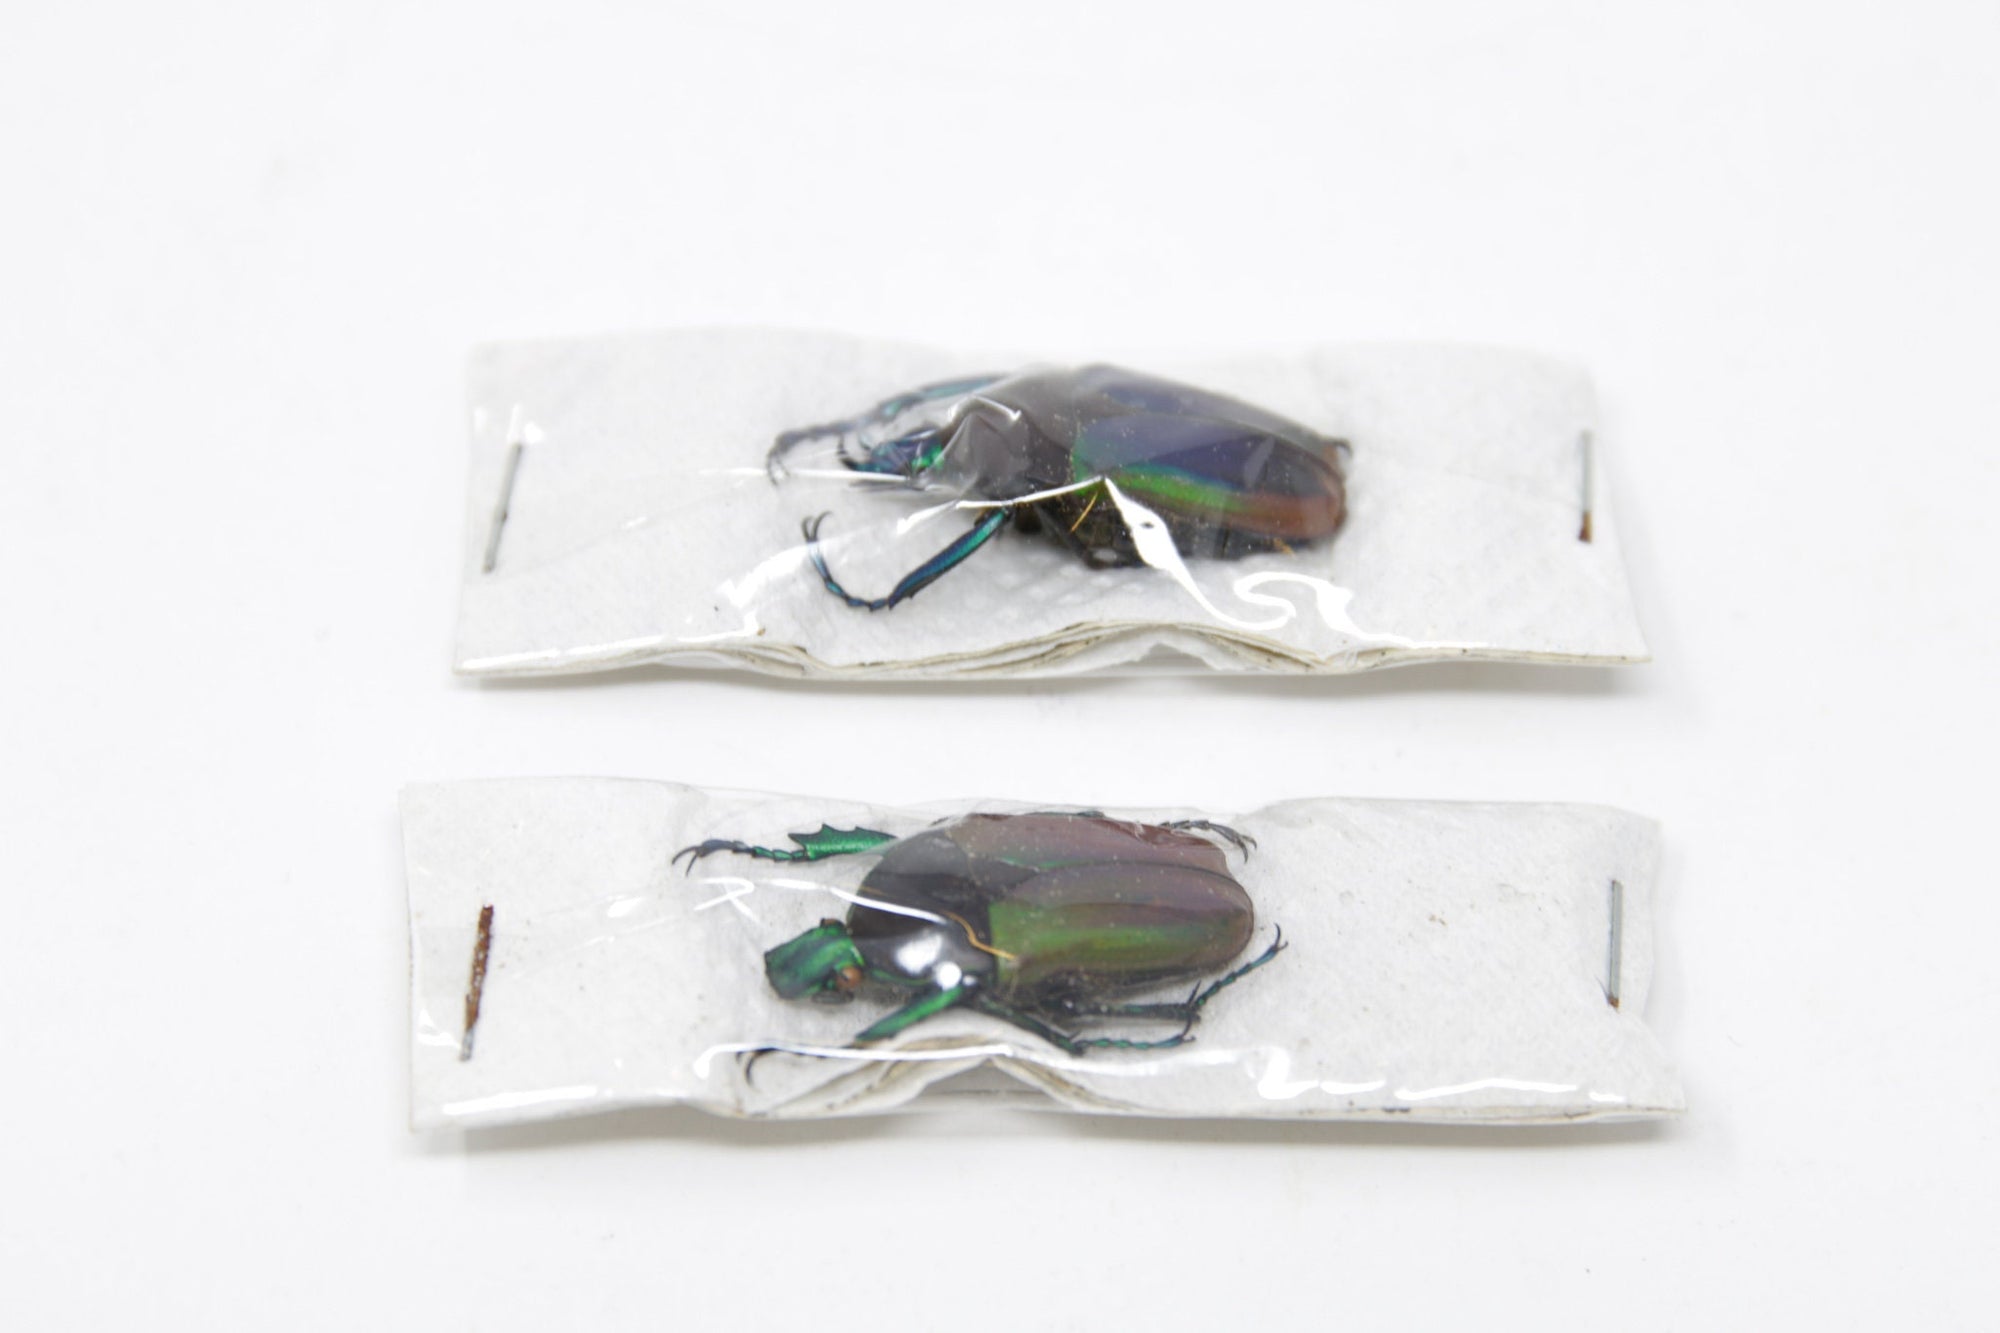 Pair (2) Neptunidae polyhorus manowensis, Unmounted Beetle Specimens with Scientific Collection Data, A1 Quality